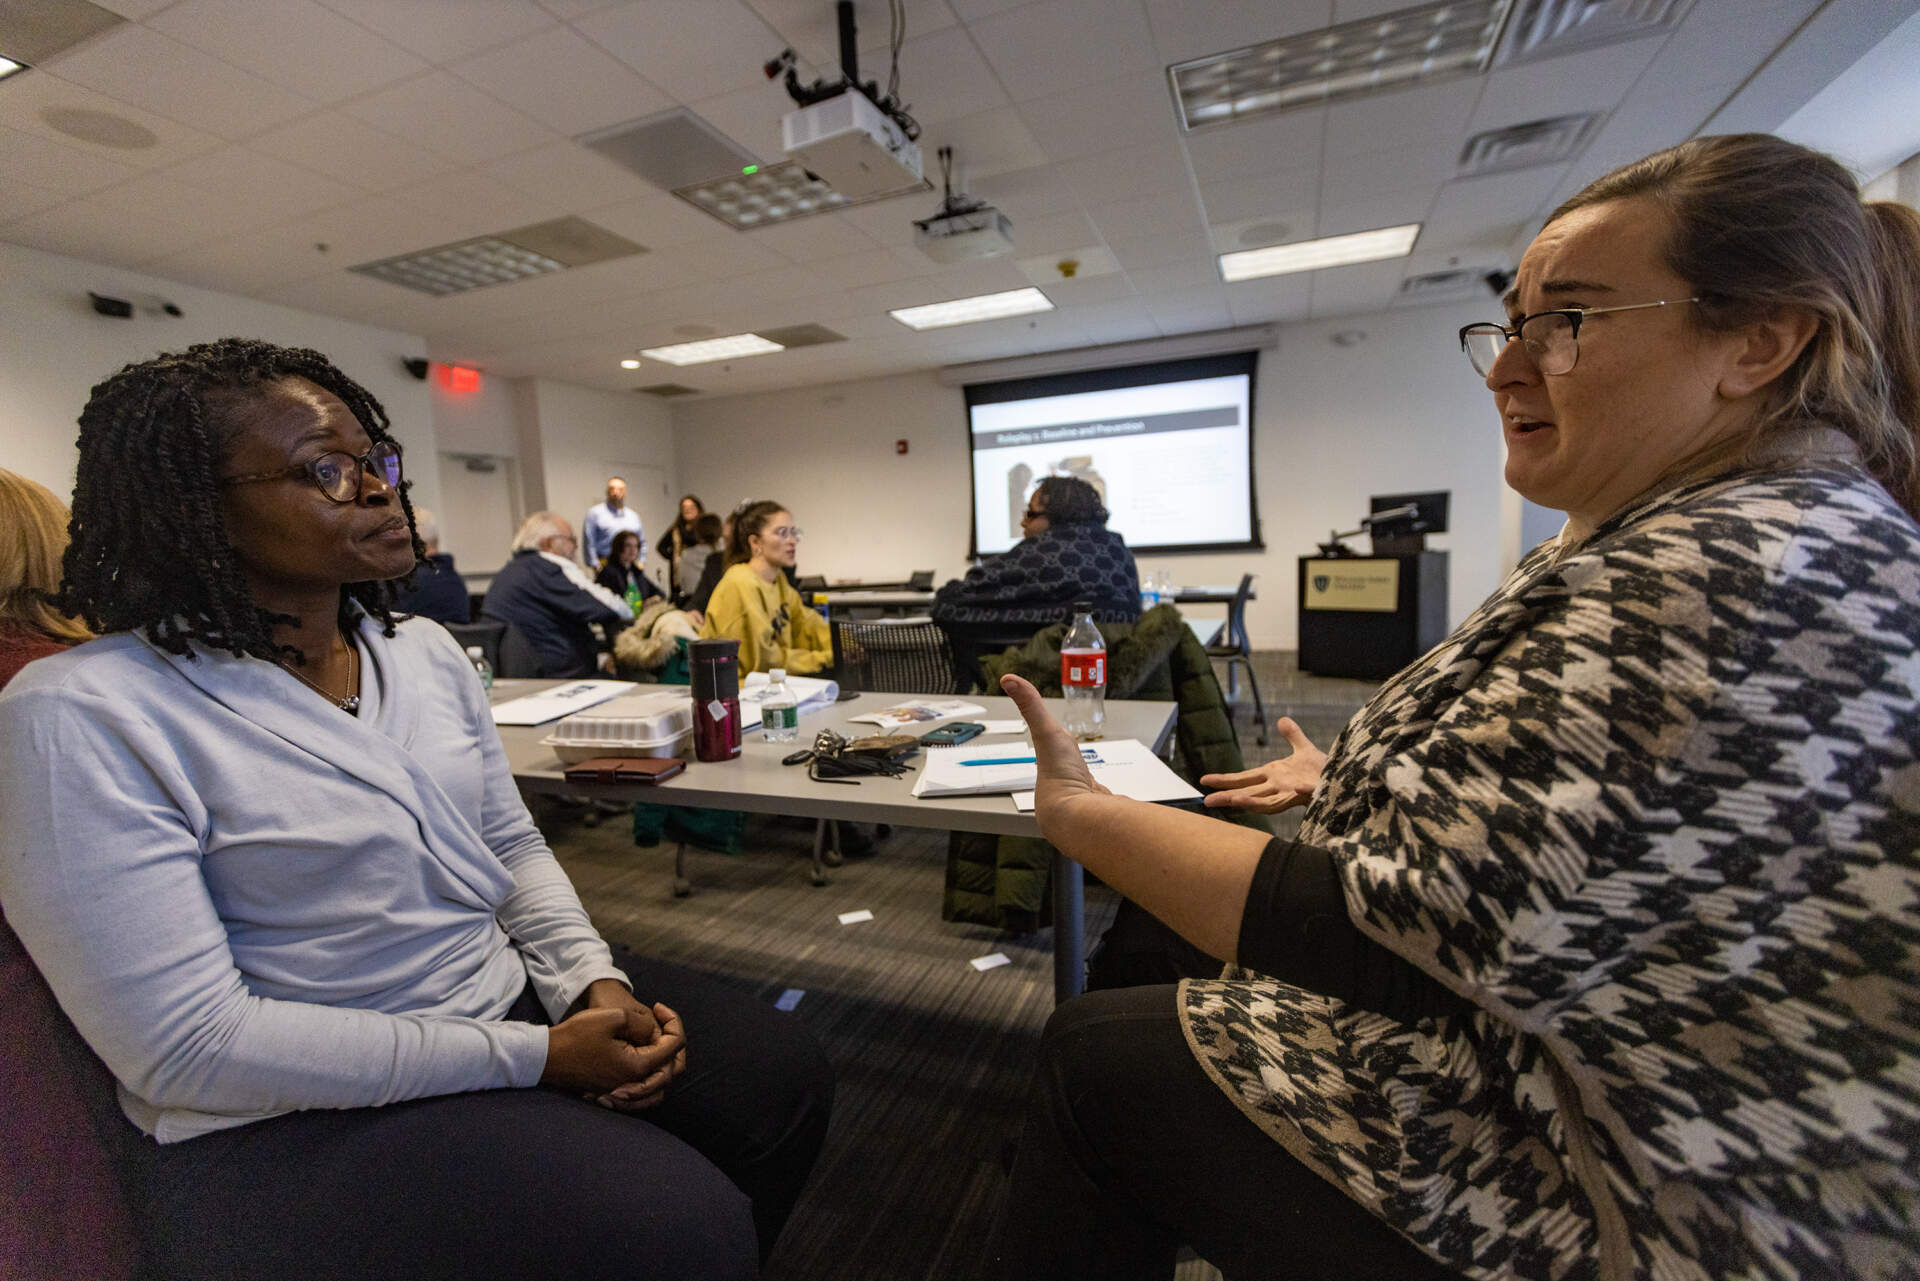 Zita Tiamuh (left), who works in program development at William James College, and Stephanie Nguyen, a psychologist, act out the roles of veteran and therapist during a portion of the suicide prevention training course. (Jesse Costa/WBUR)